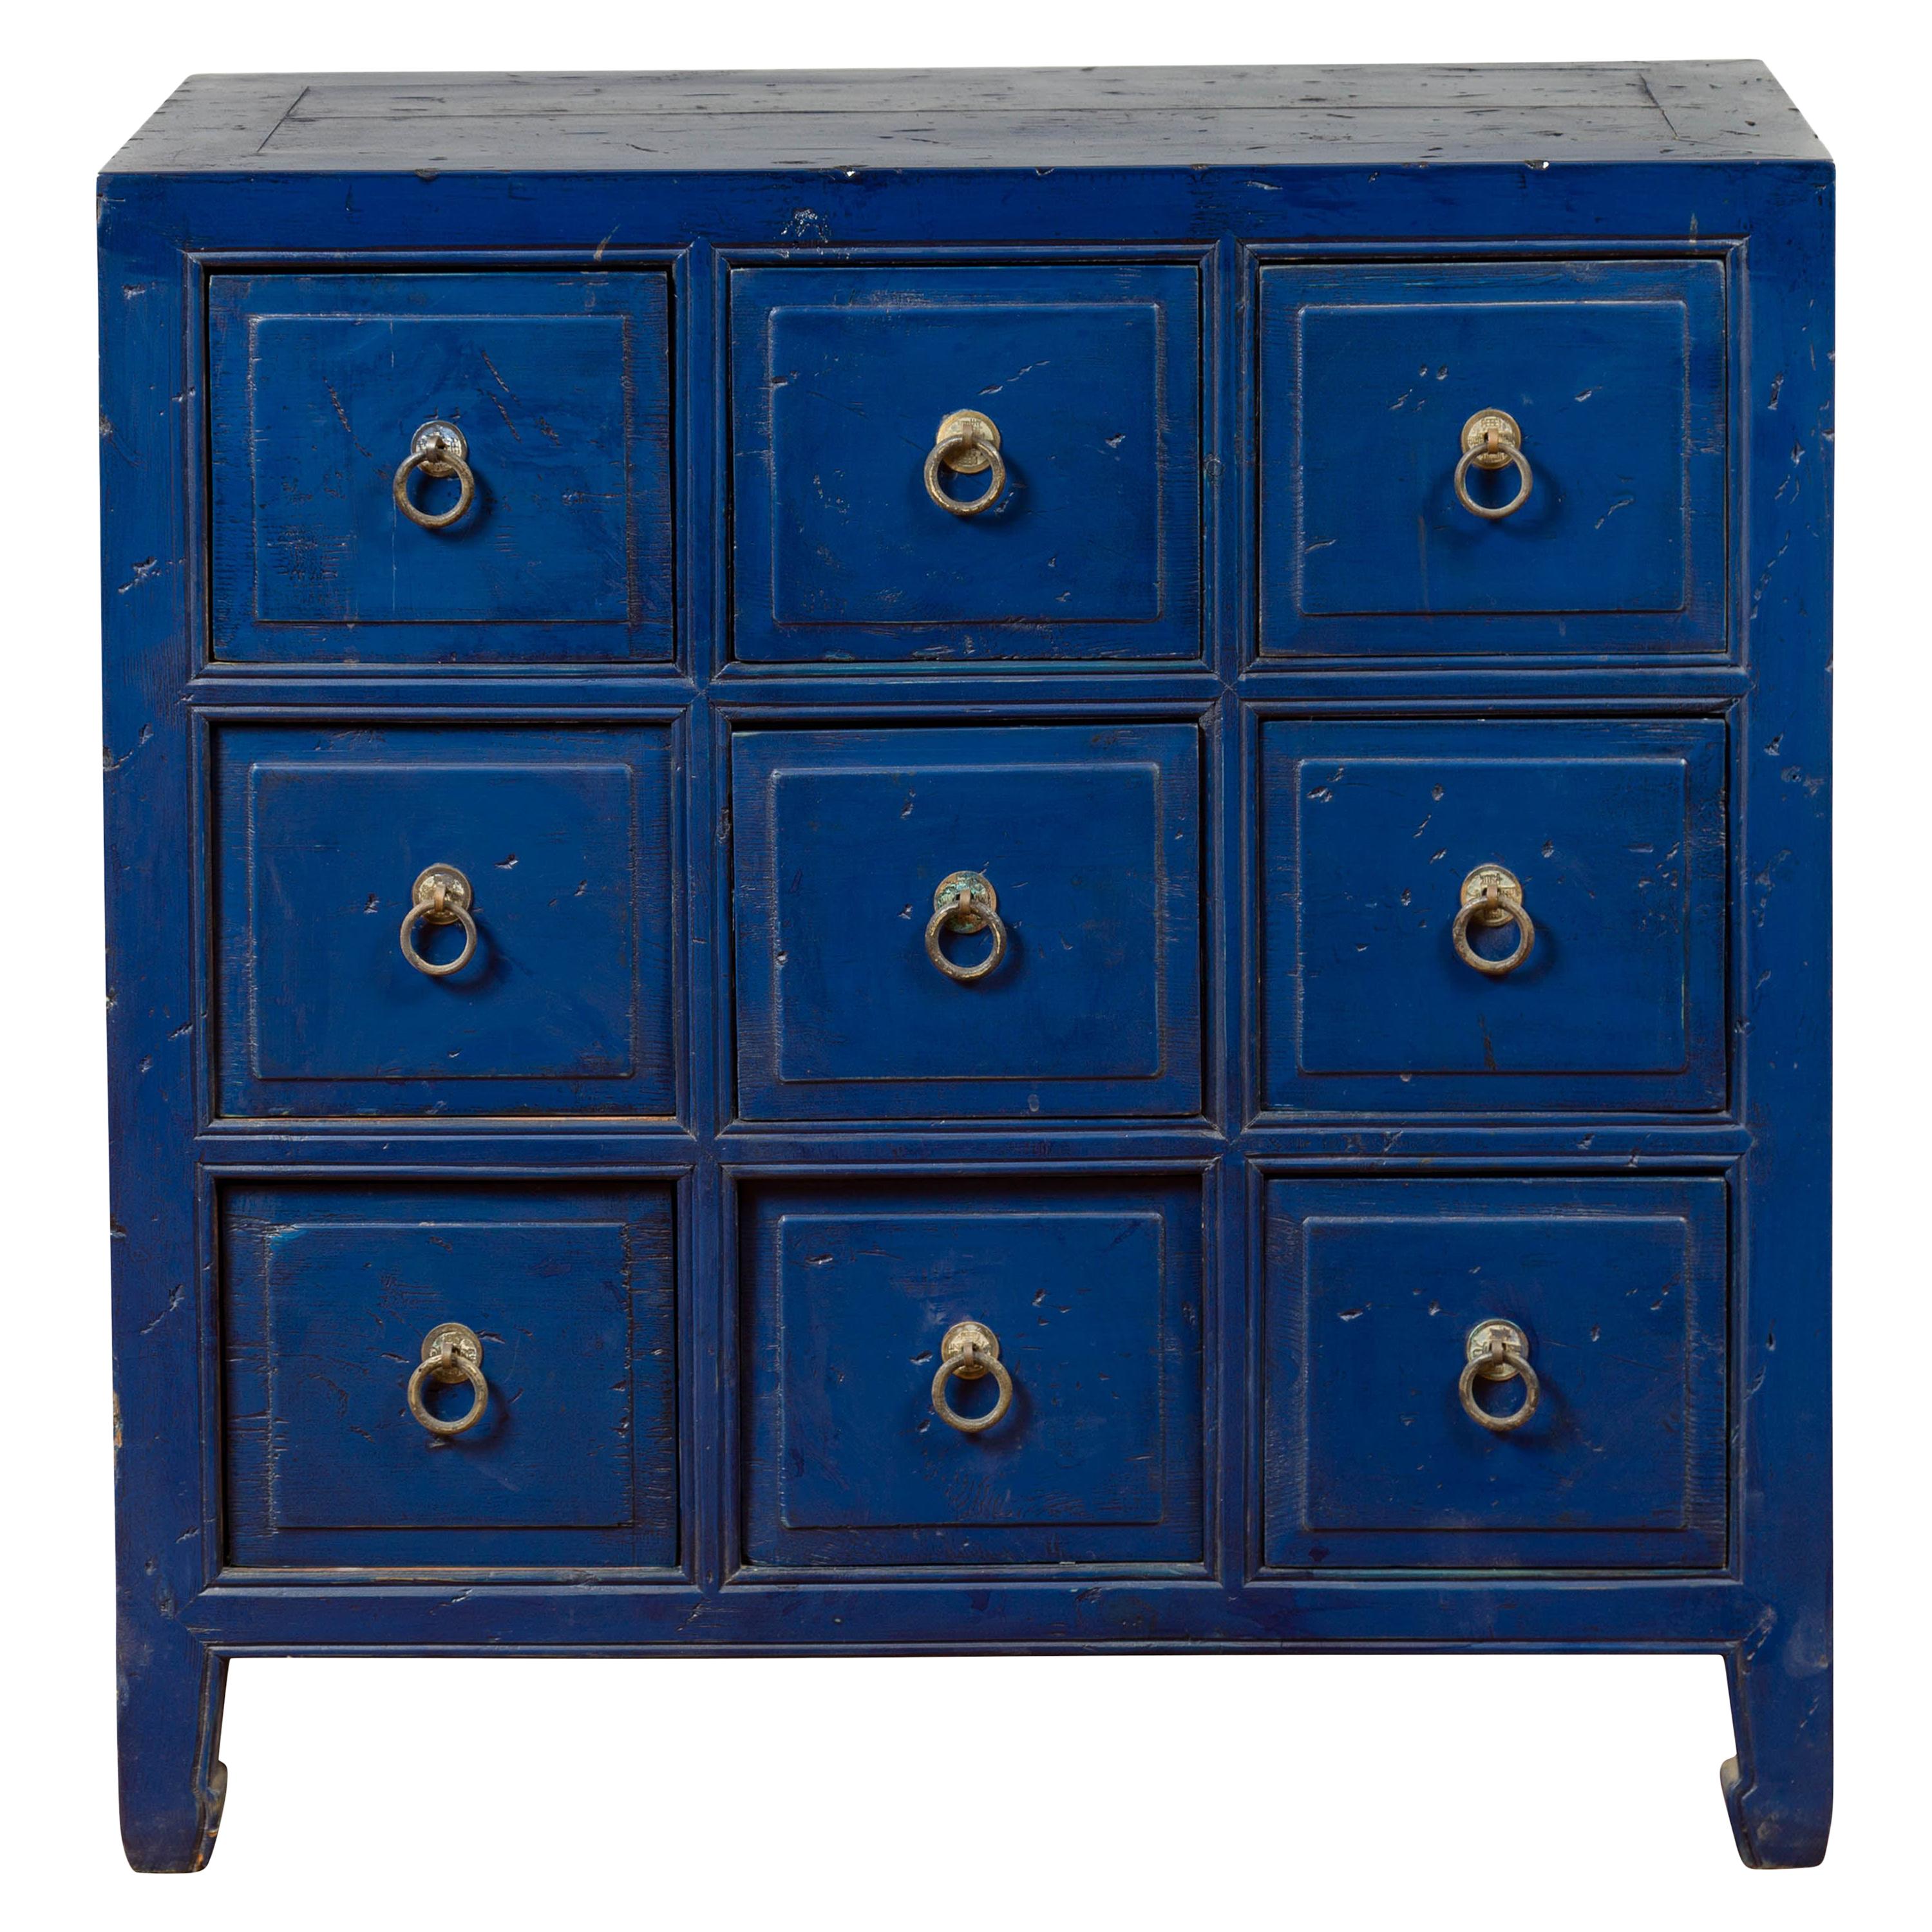 Vintage Chinese Blue Painted Nine-Drawer Apothecary Chest with Brass Ring Pulls